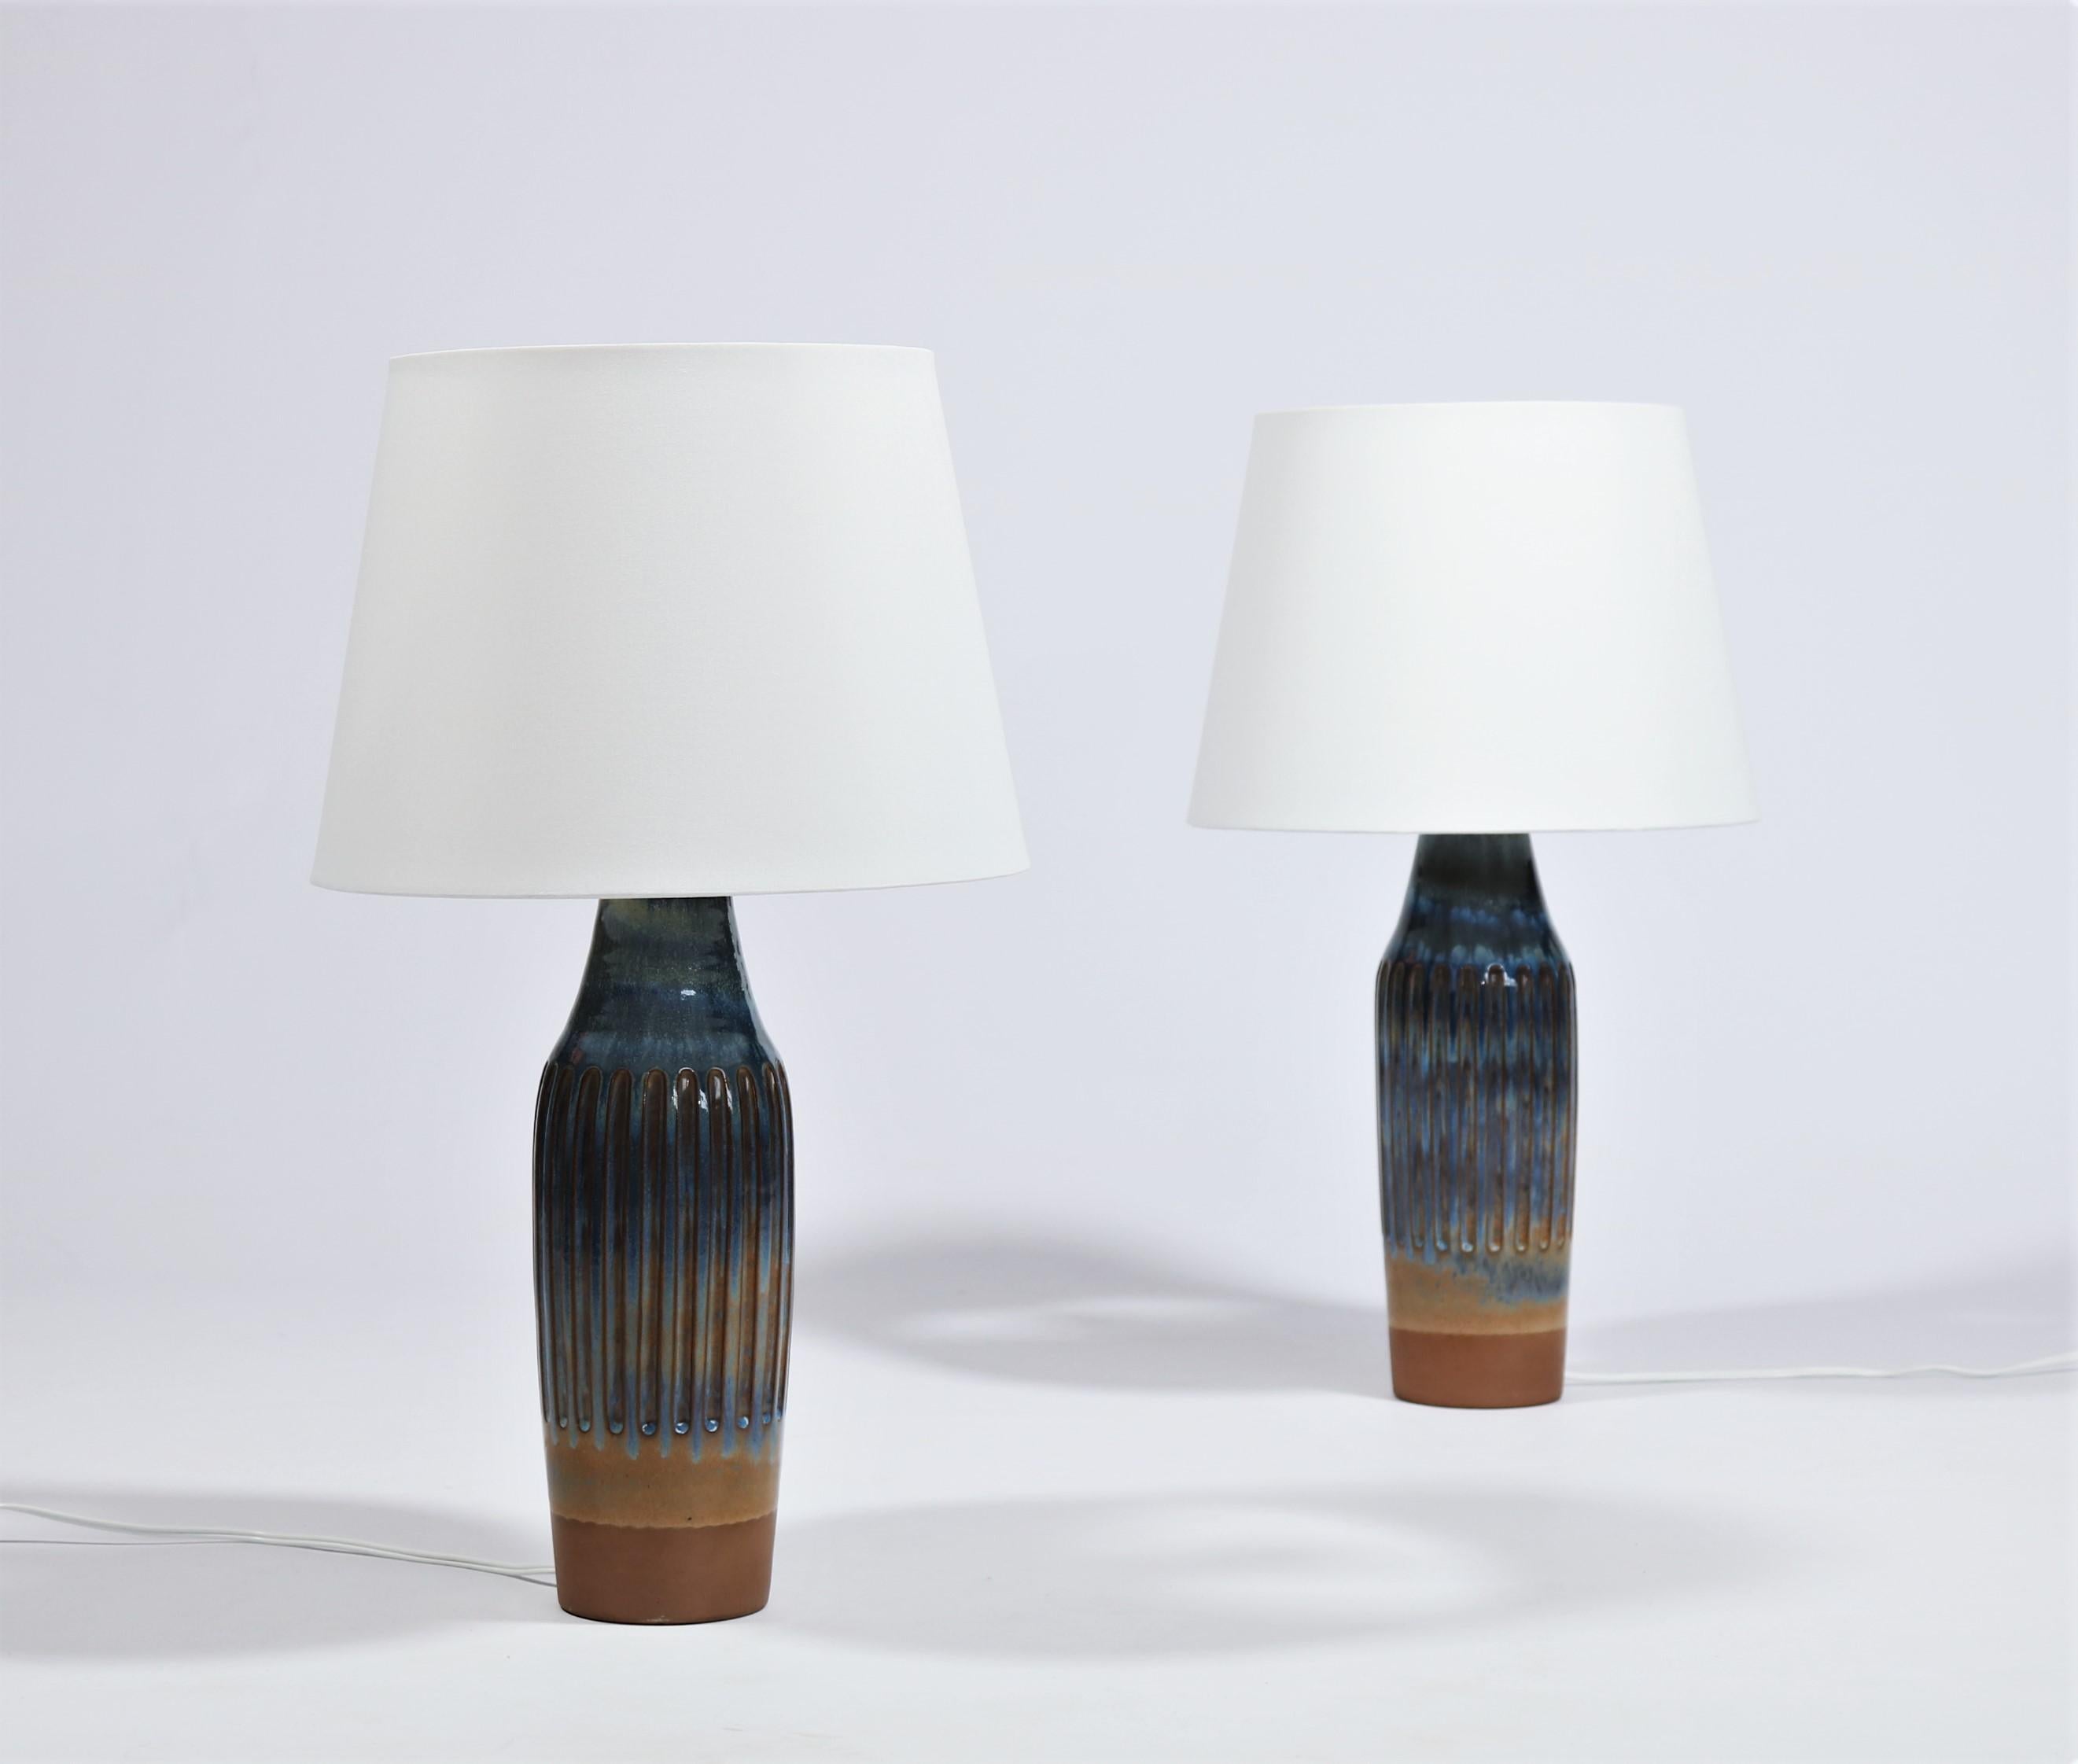 Stunning pair of ceramics table lamps model B 295 from 1964 made in Denmark in collaboration between ceramic workshop Michael Andersen & Son and lighting company Lyfa. Beautiful glossy blue nuanced glaze with notes of red, purple, turquoise and